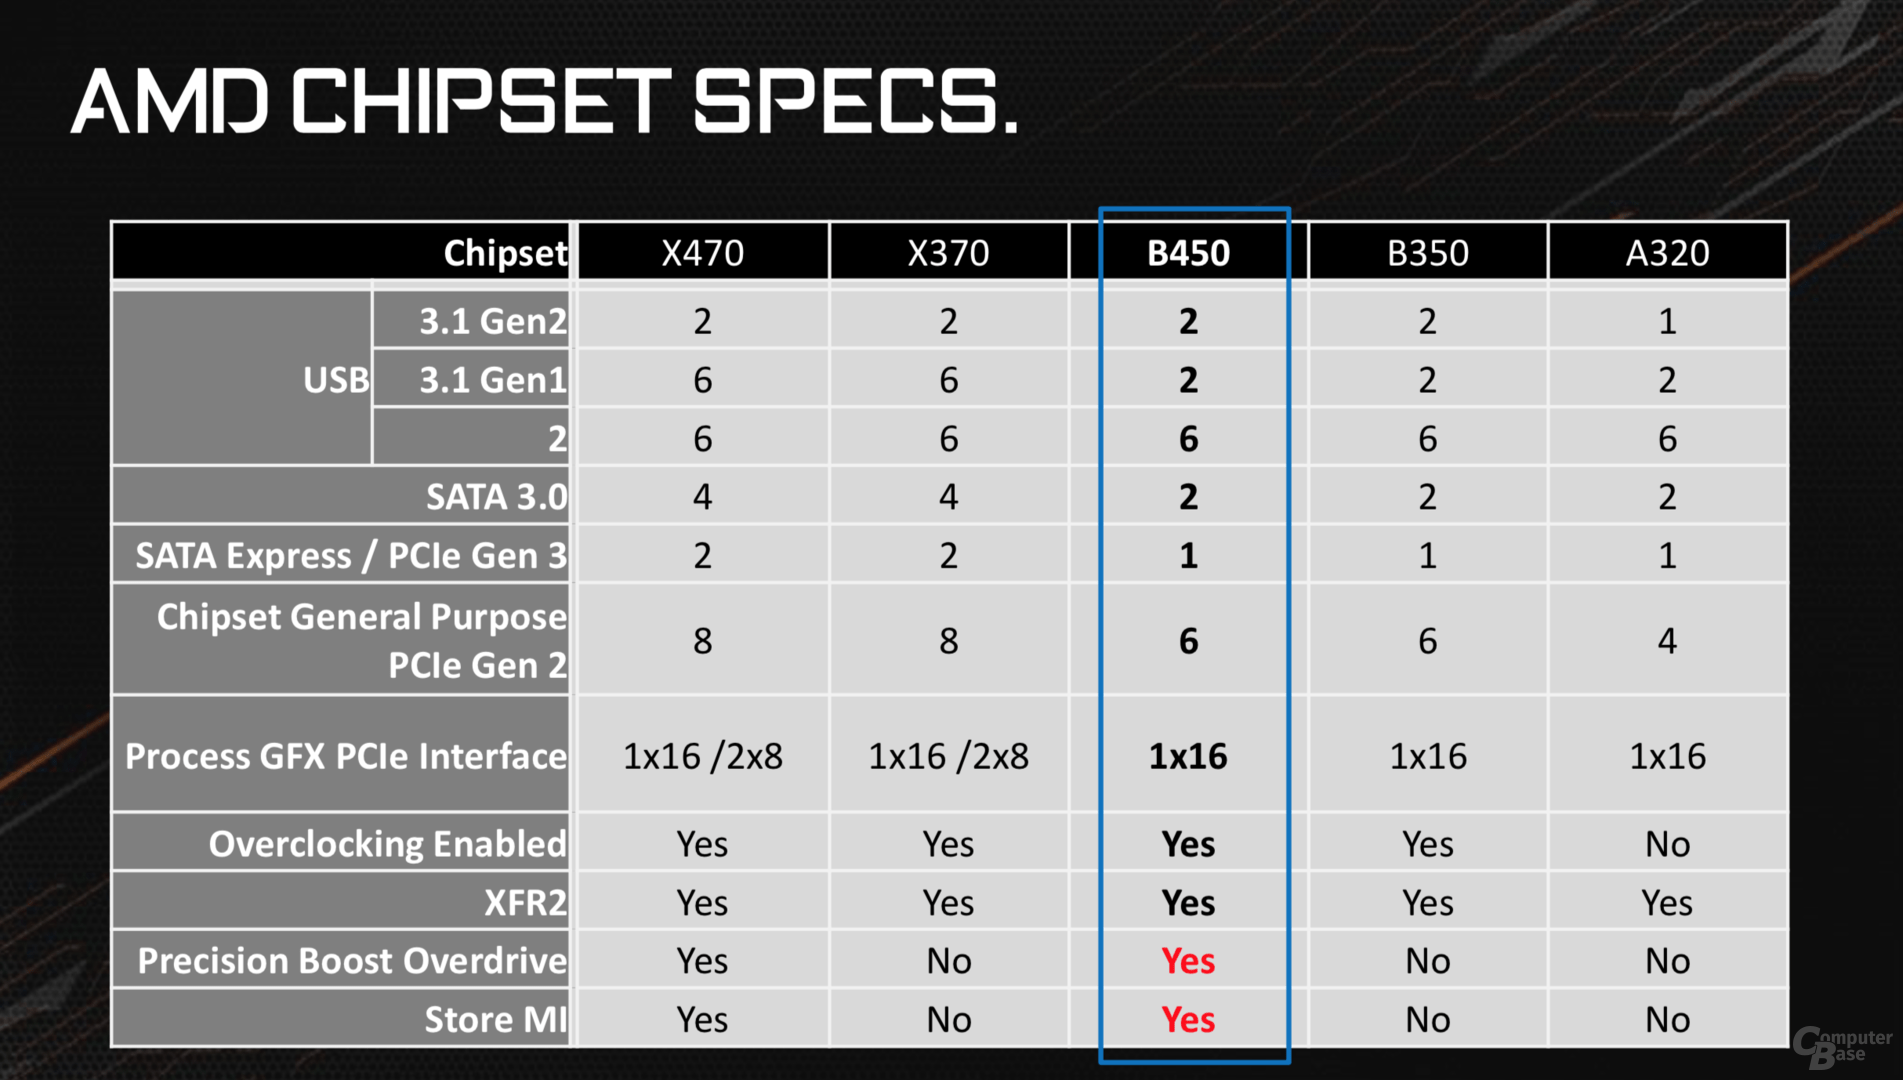 AMD Precision Boost Overdrive is there - theoretically